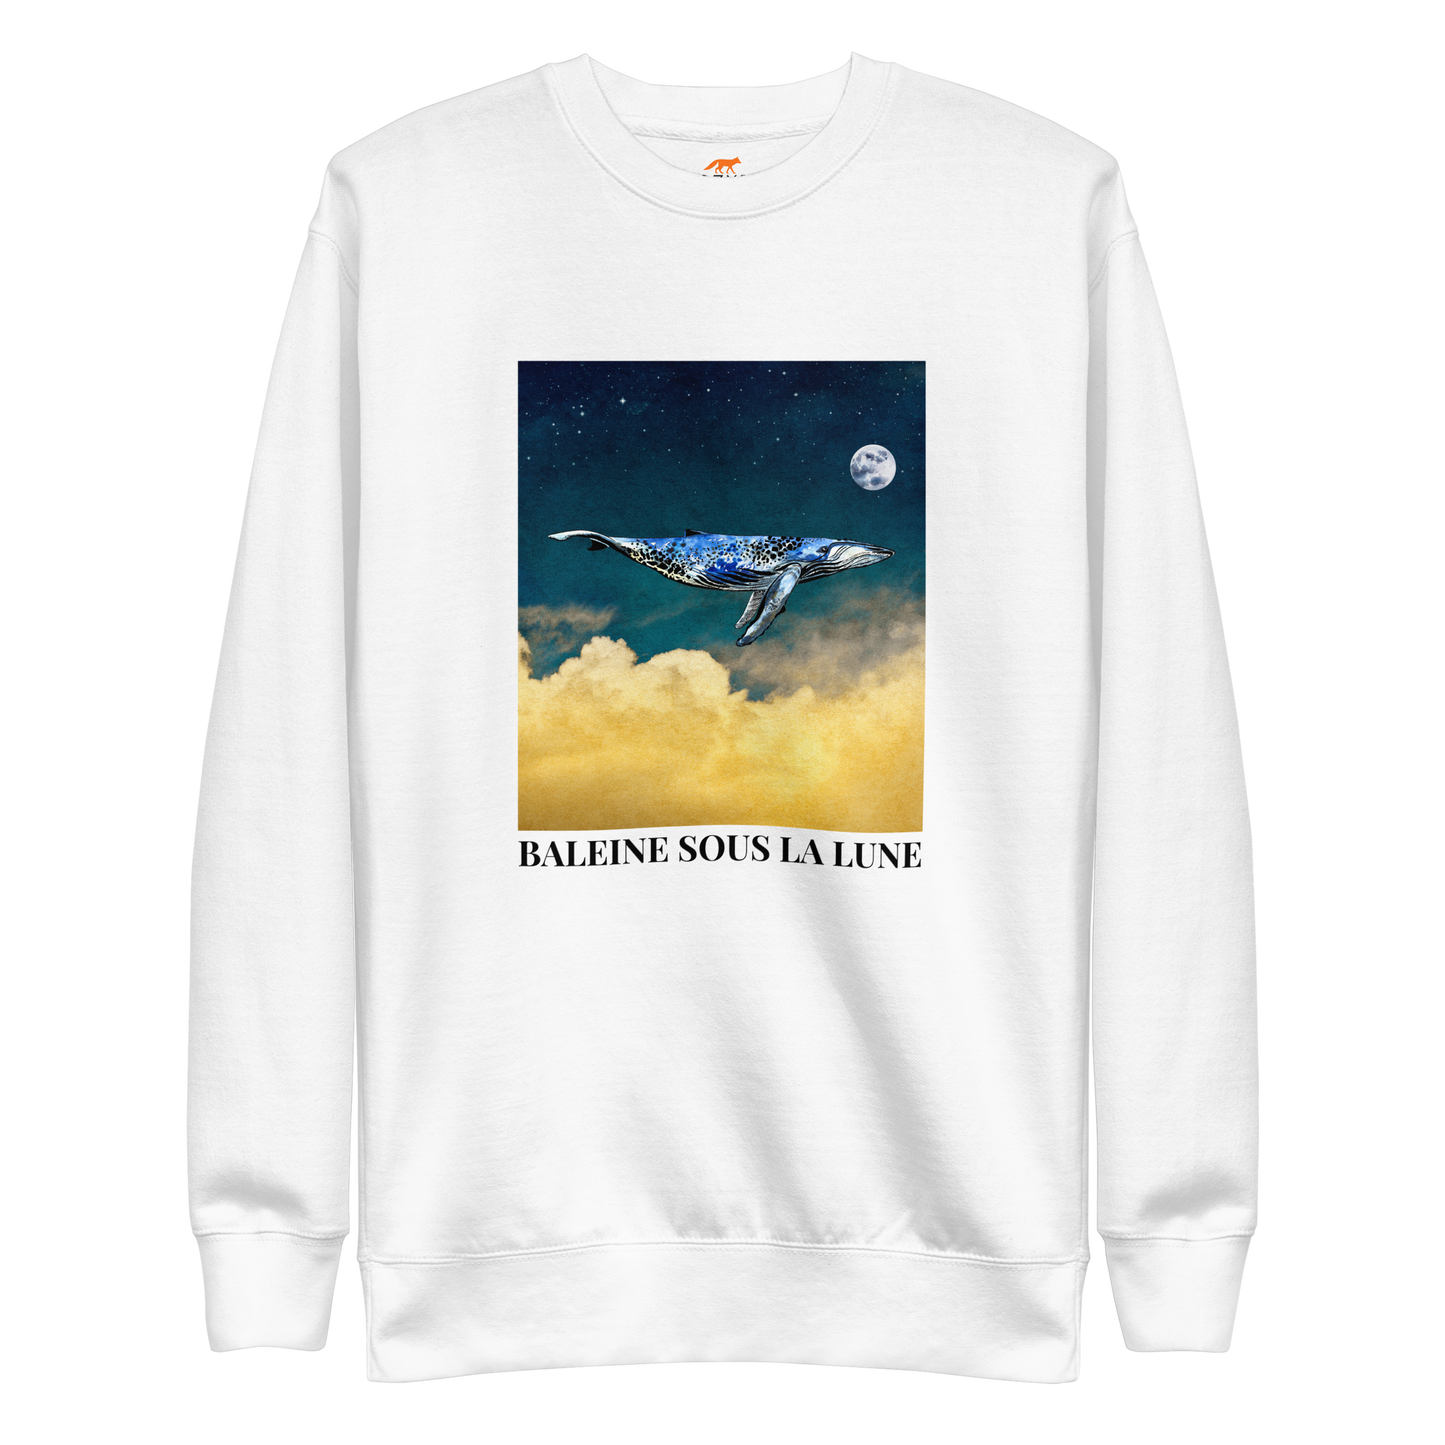 White Premium Whale Sweatshirt featuring a majestic Whale Under The Moon graphic on the chest - Cool Graphic Whale Sweatshirts - Boozy Fox